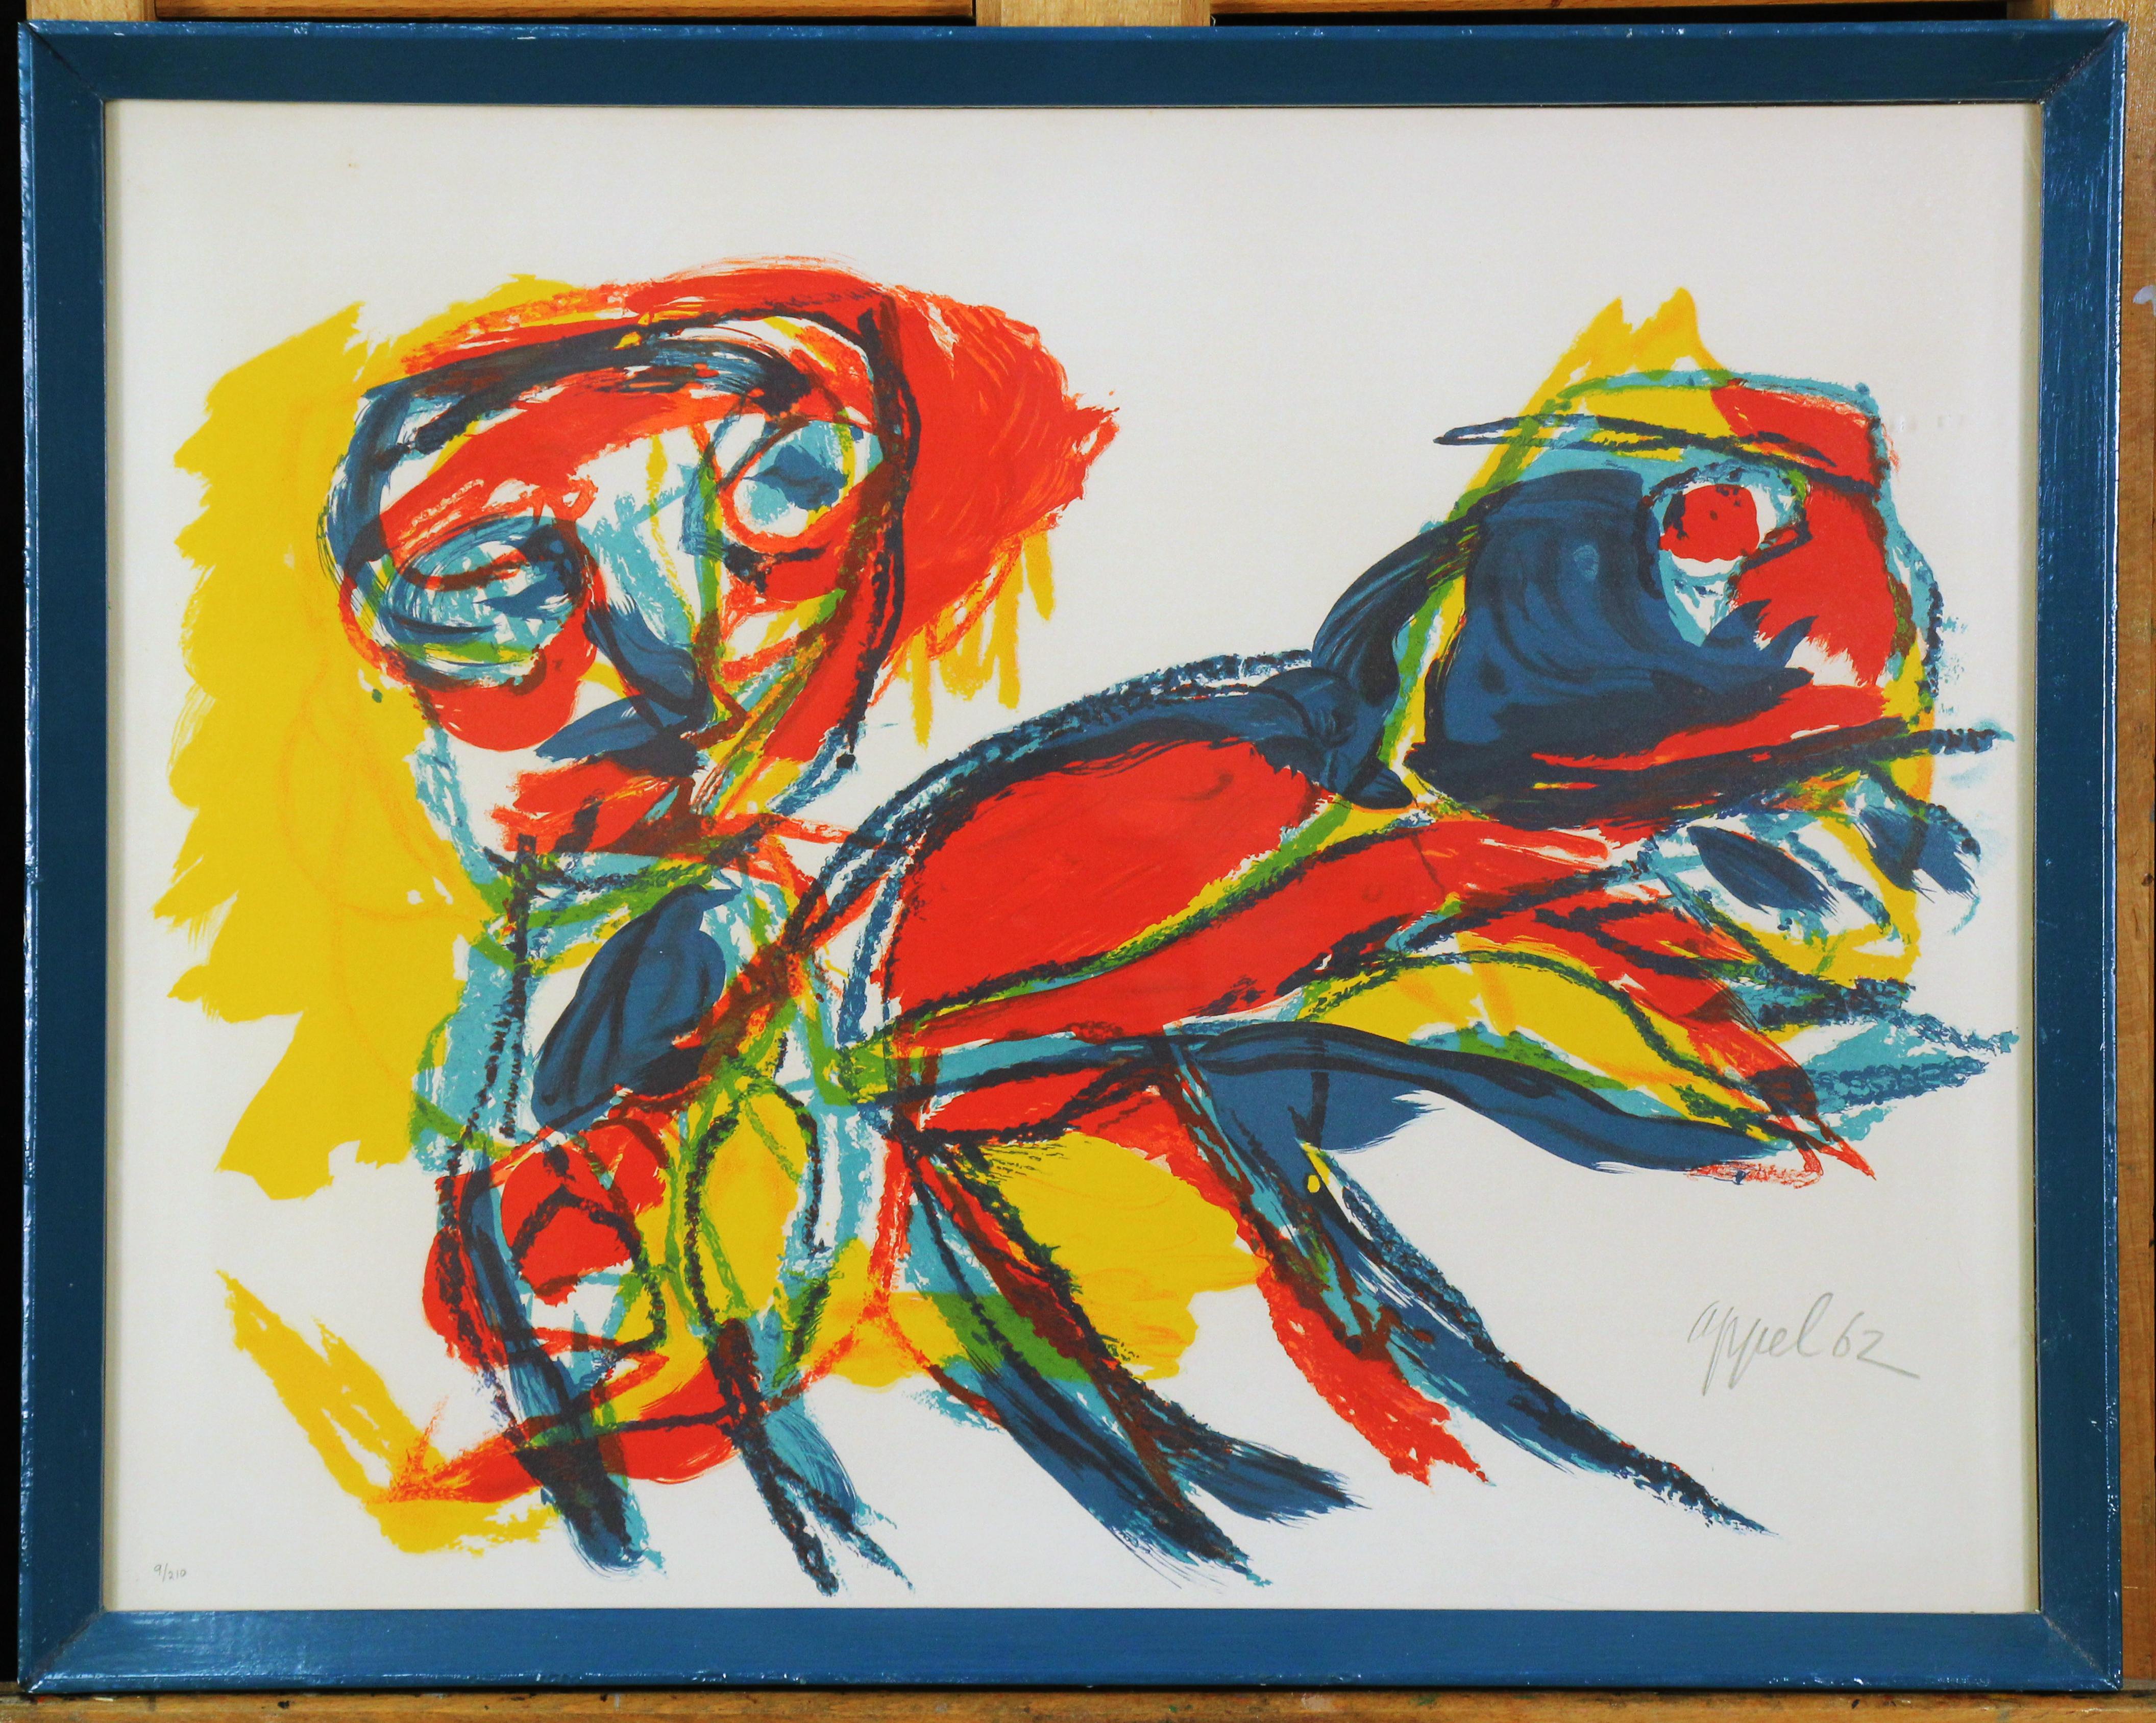 Color Abstract of Man and Animal, Color Lithograph, 1962, Signed and Numbered - Print by Karel Appel